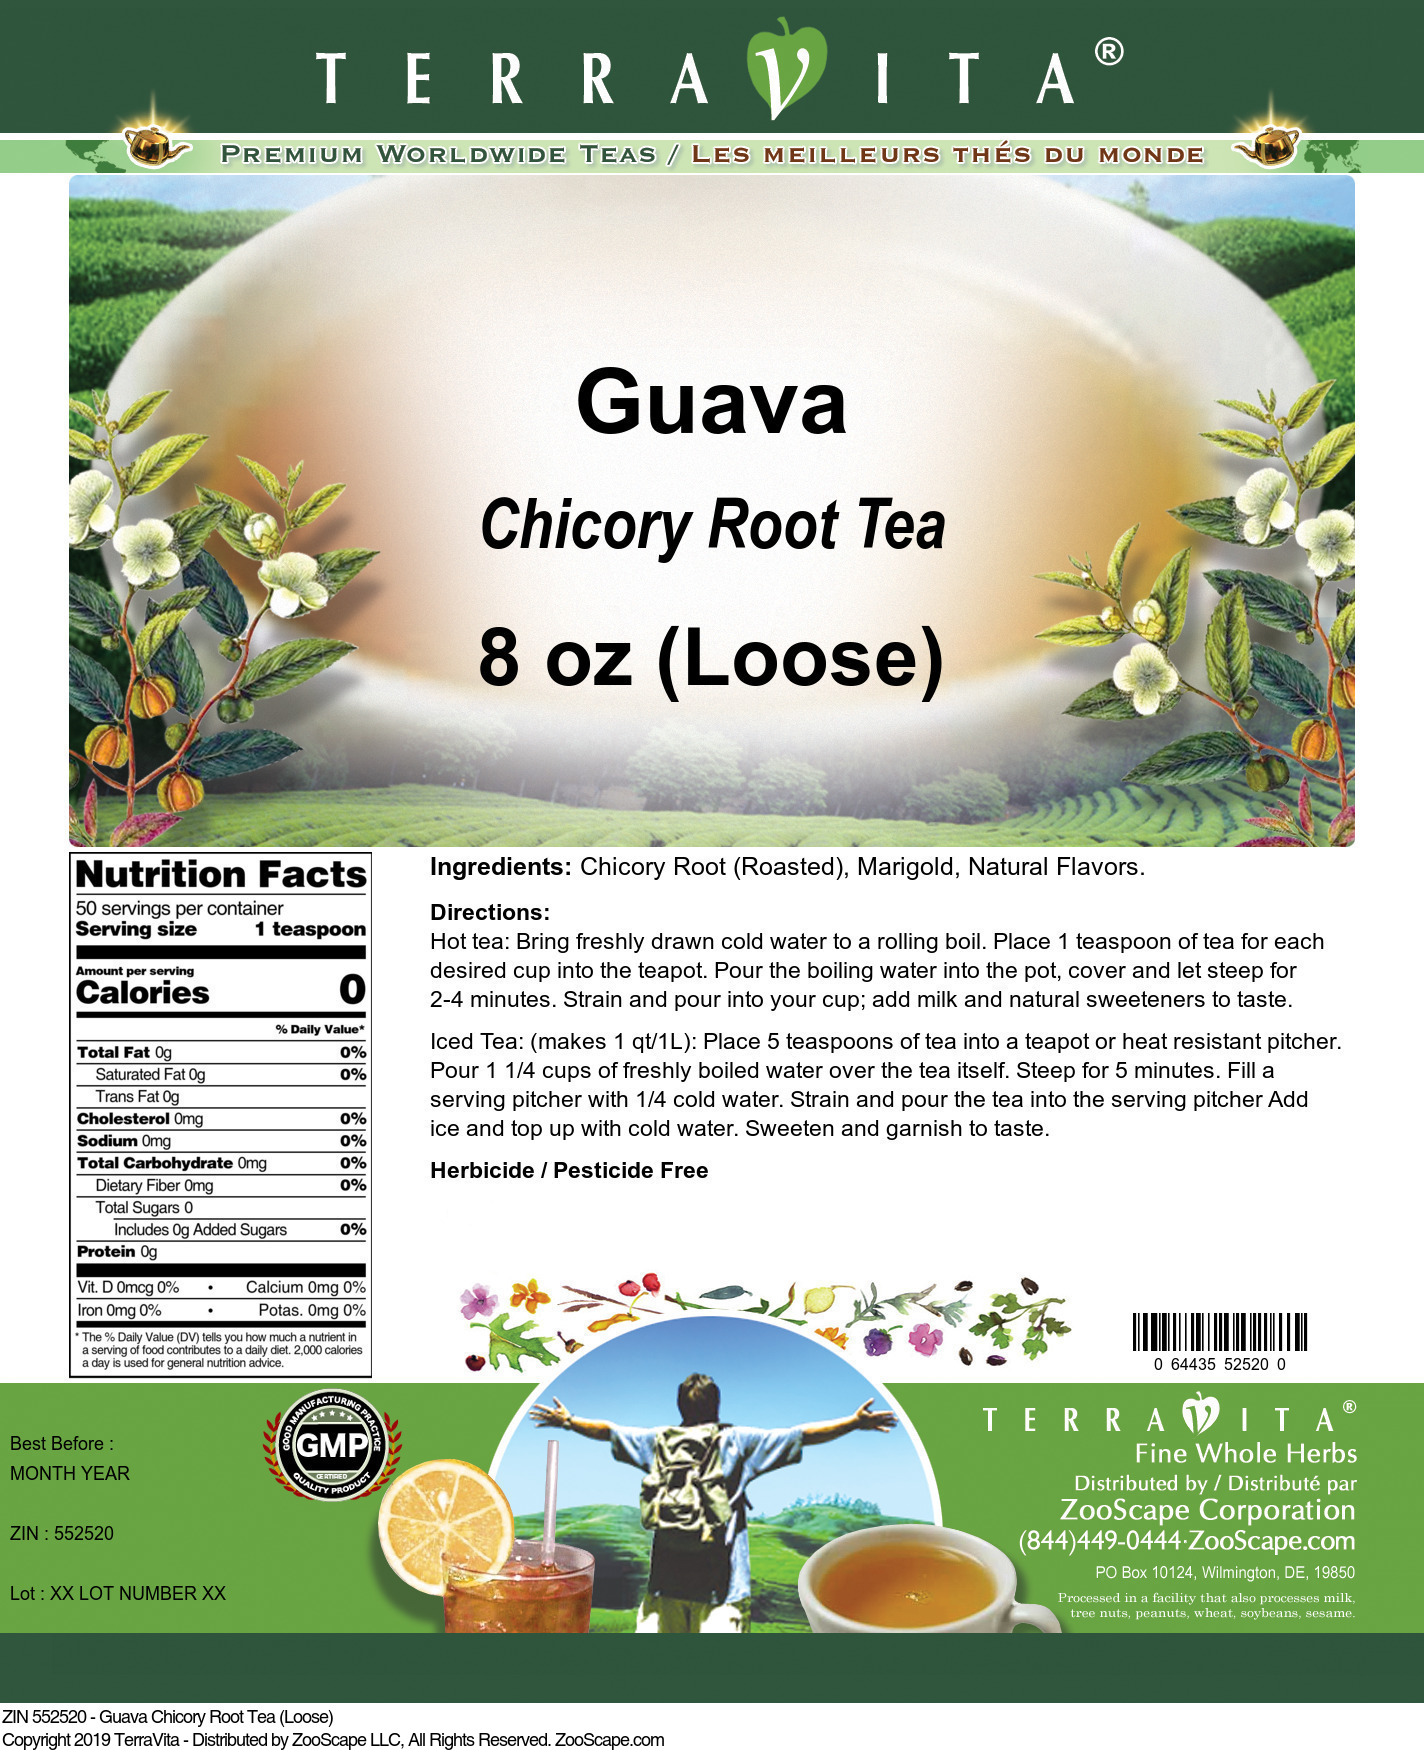 Guava Chicory Root Tea (Loose) - Label